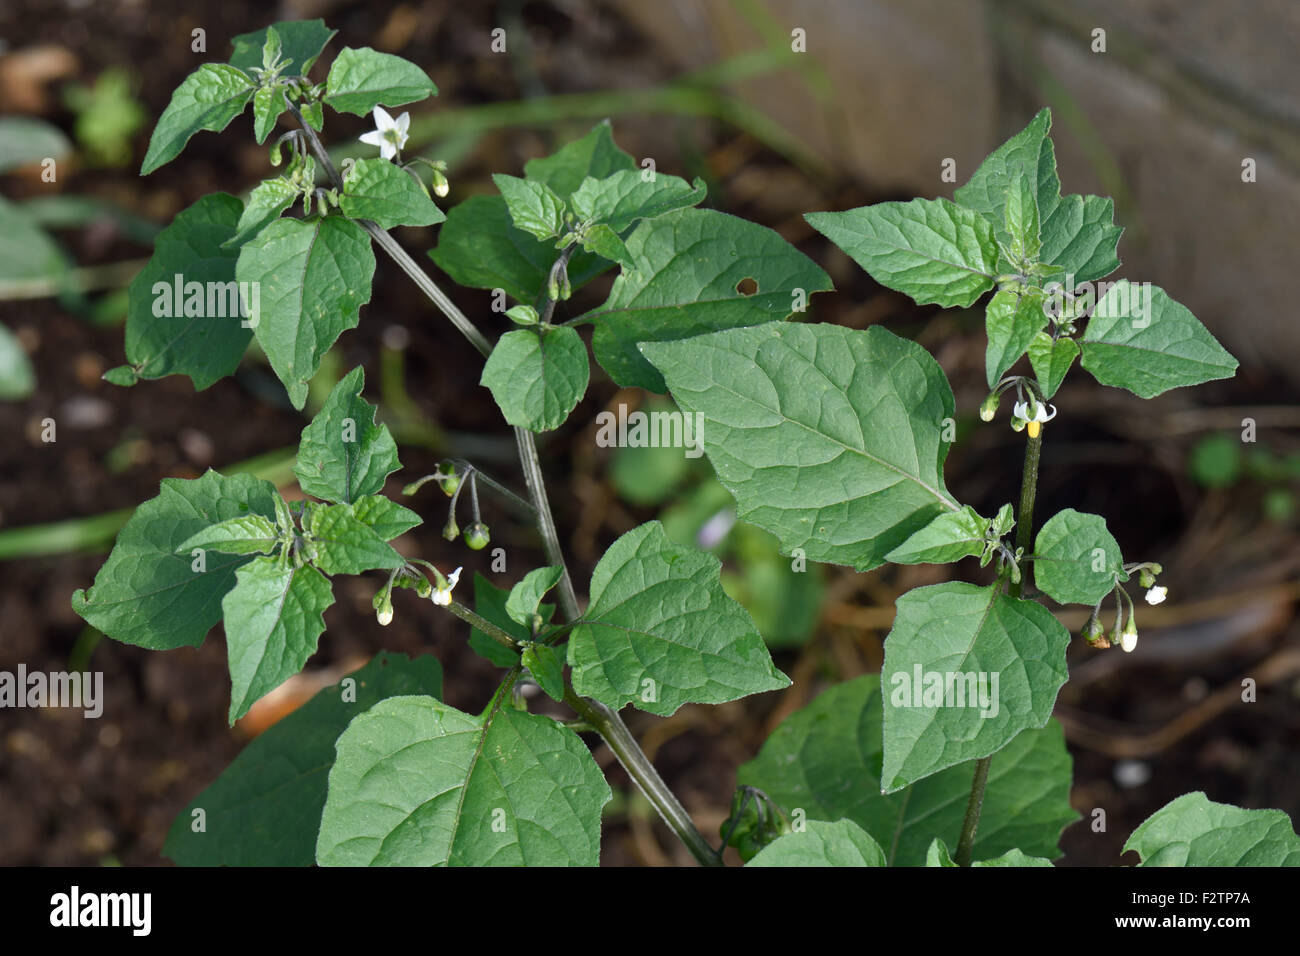 Black nightshade, Solanum nigrum, flowering plant of an annual arable weed with small white flowers and unripe green berries. Stock Photo